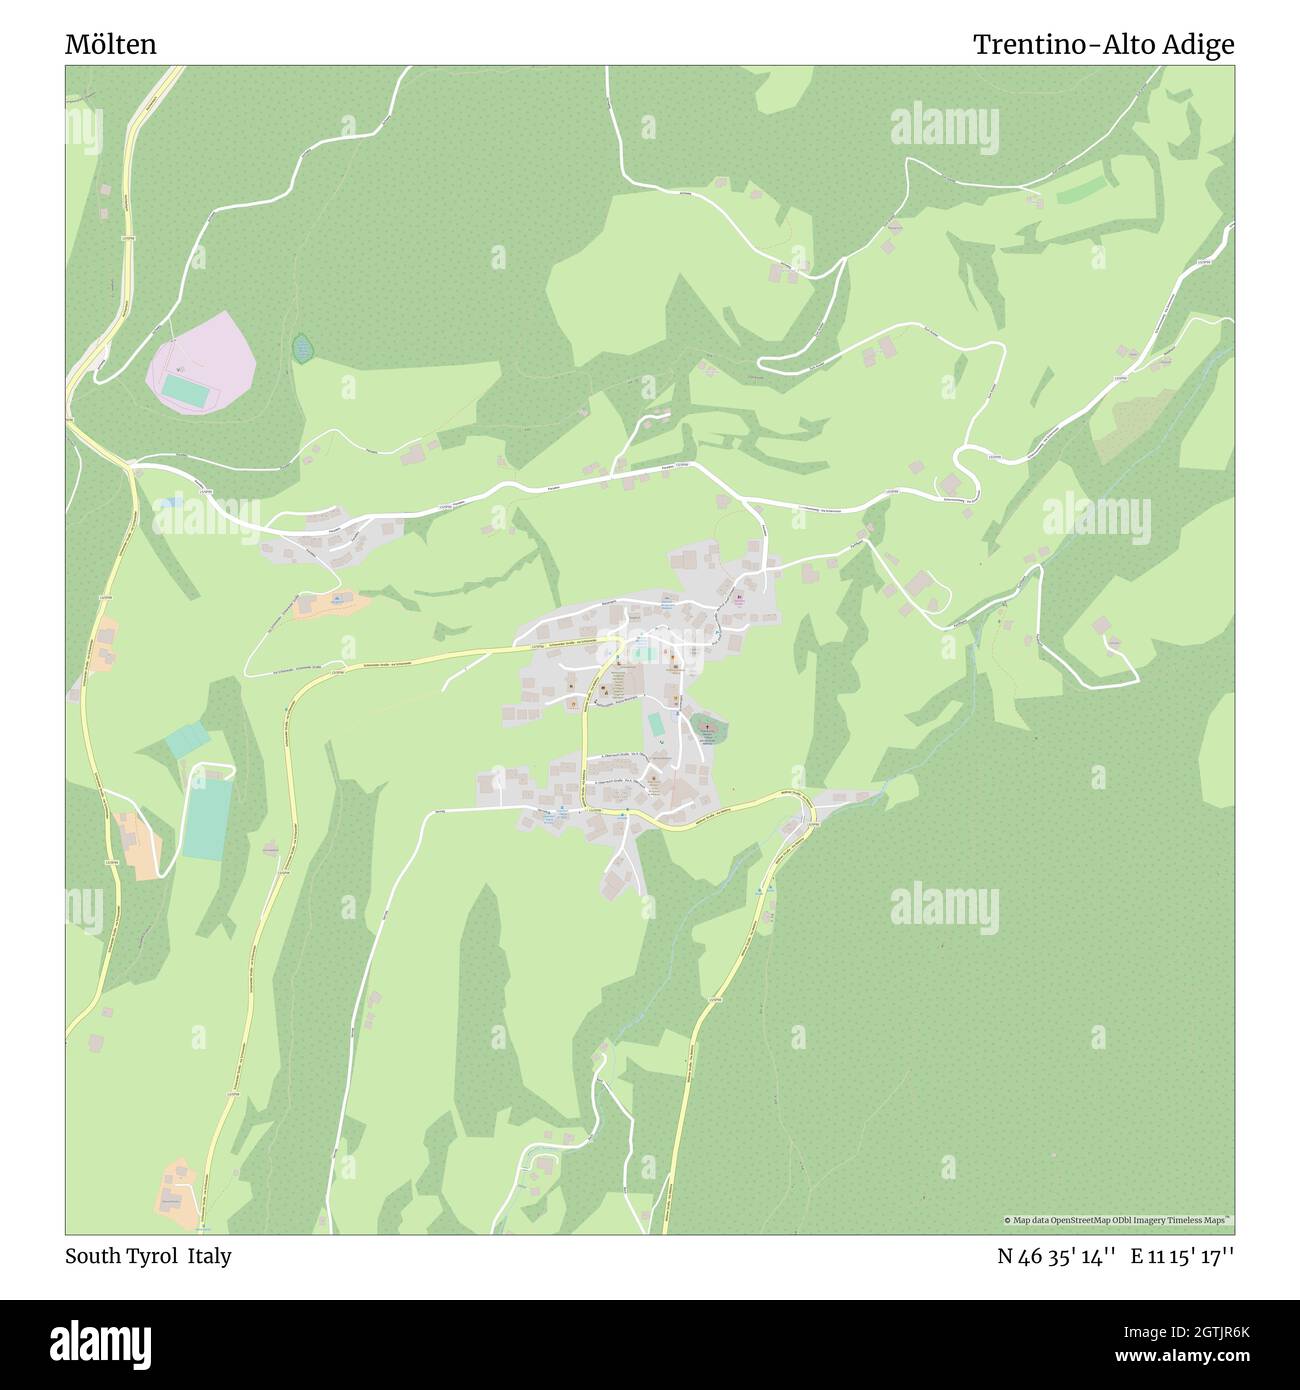 Mölten, South Tyrol, Italy, Trentino-Alto Adige, N 46 35' 14'', E 11 15' 17'', map, Timeless Map published in 2021. Travelers, explorers and adventurers like Florence Nightingale, David Livingstone, Ernest Shackleton, Lewis and Clark and Sherlock Holmes relied on maps to plan travels to the world's most remote corners, Timeless Maps is mapping most locations on the globe, showing the achievement of great dreams Stock Photo